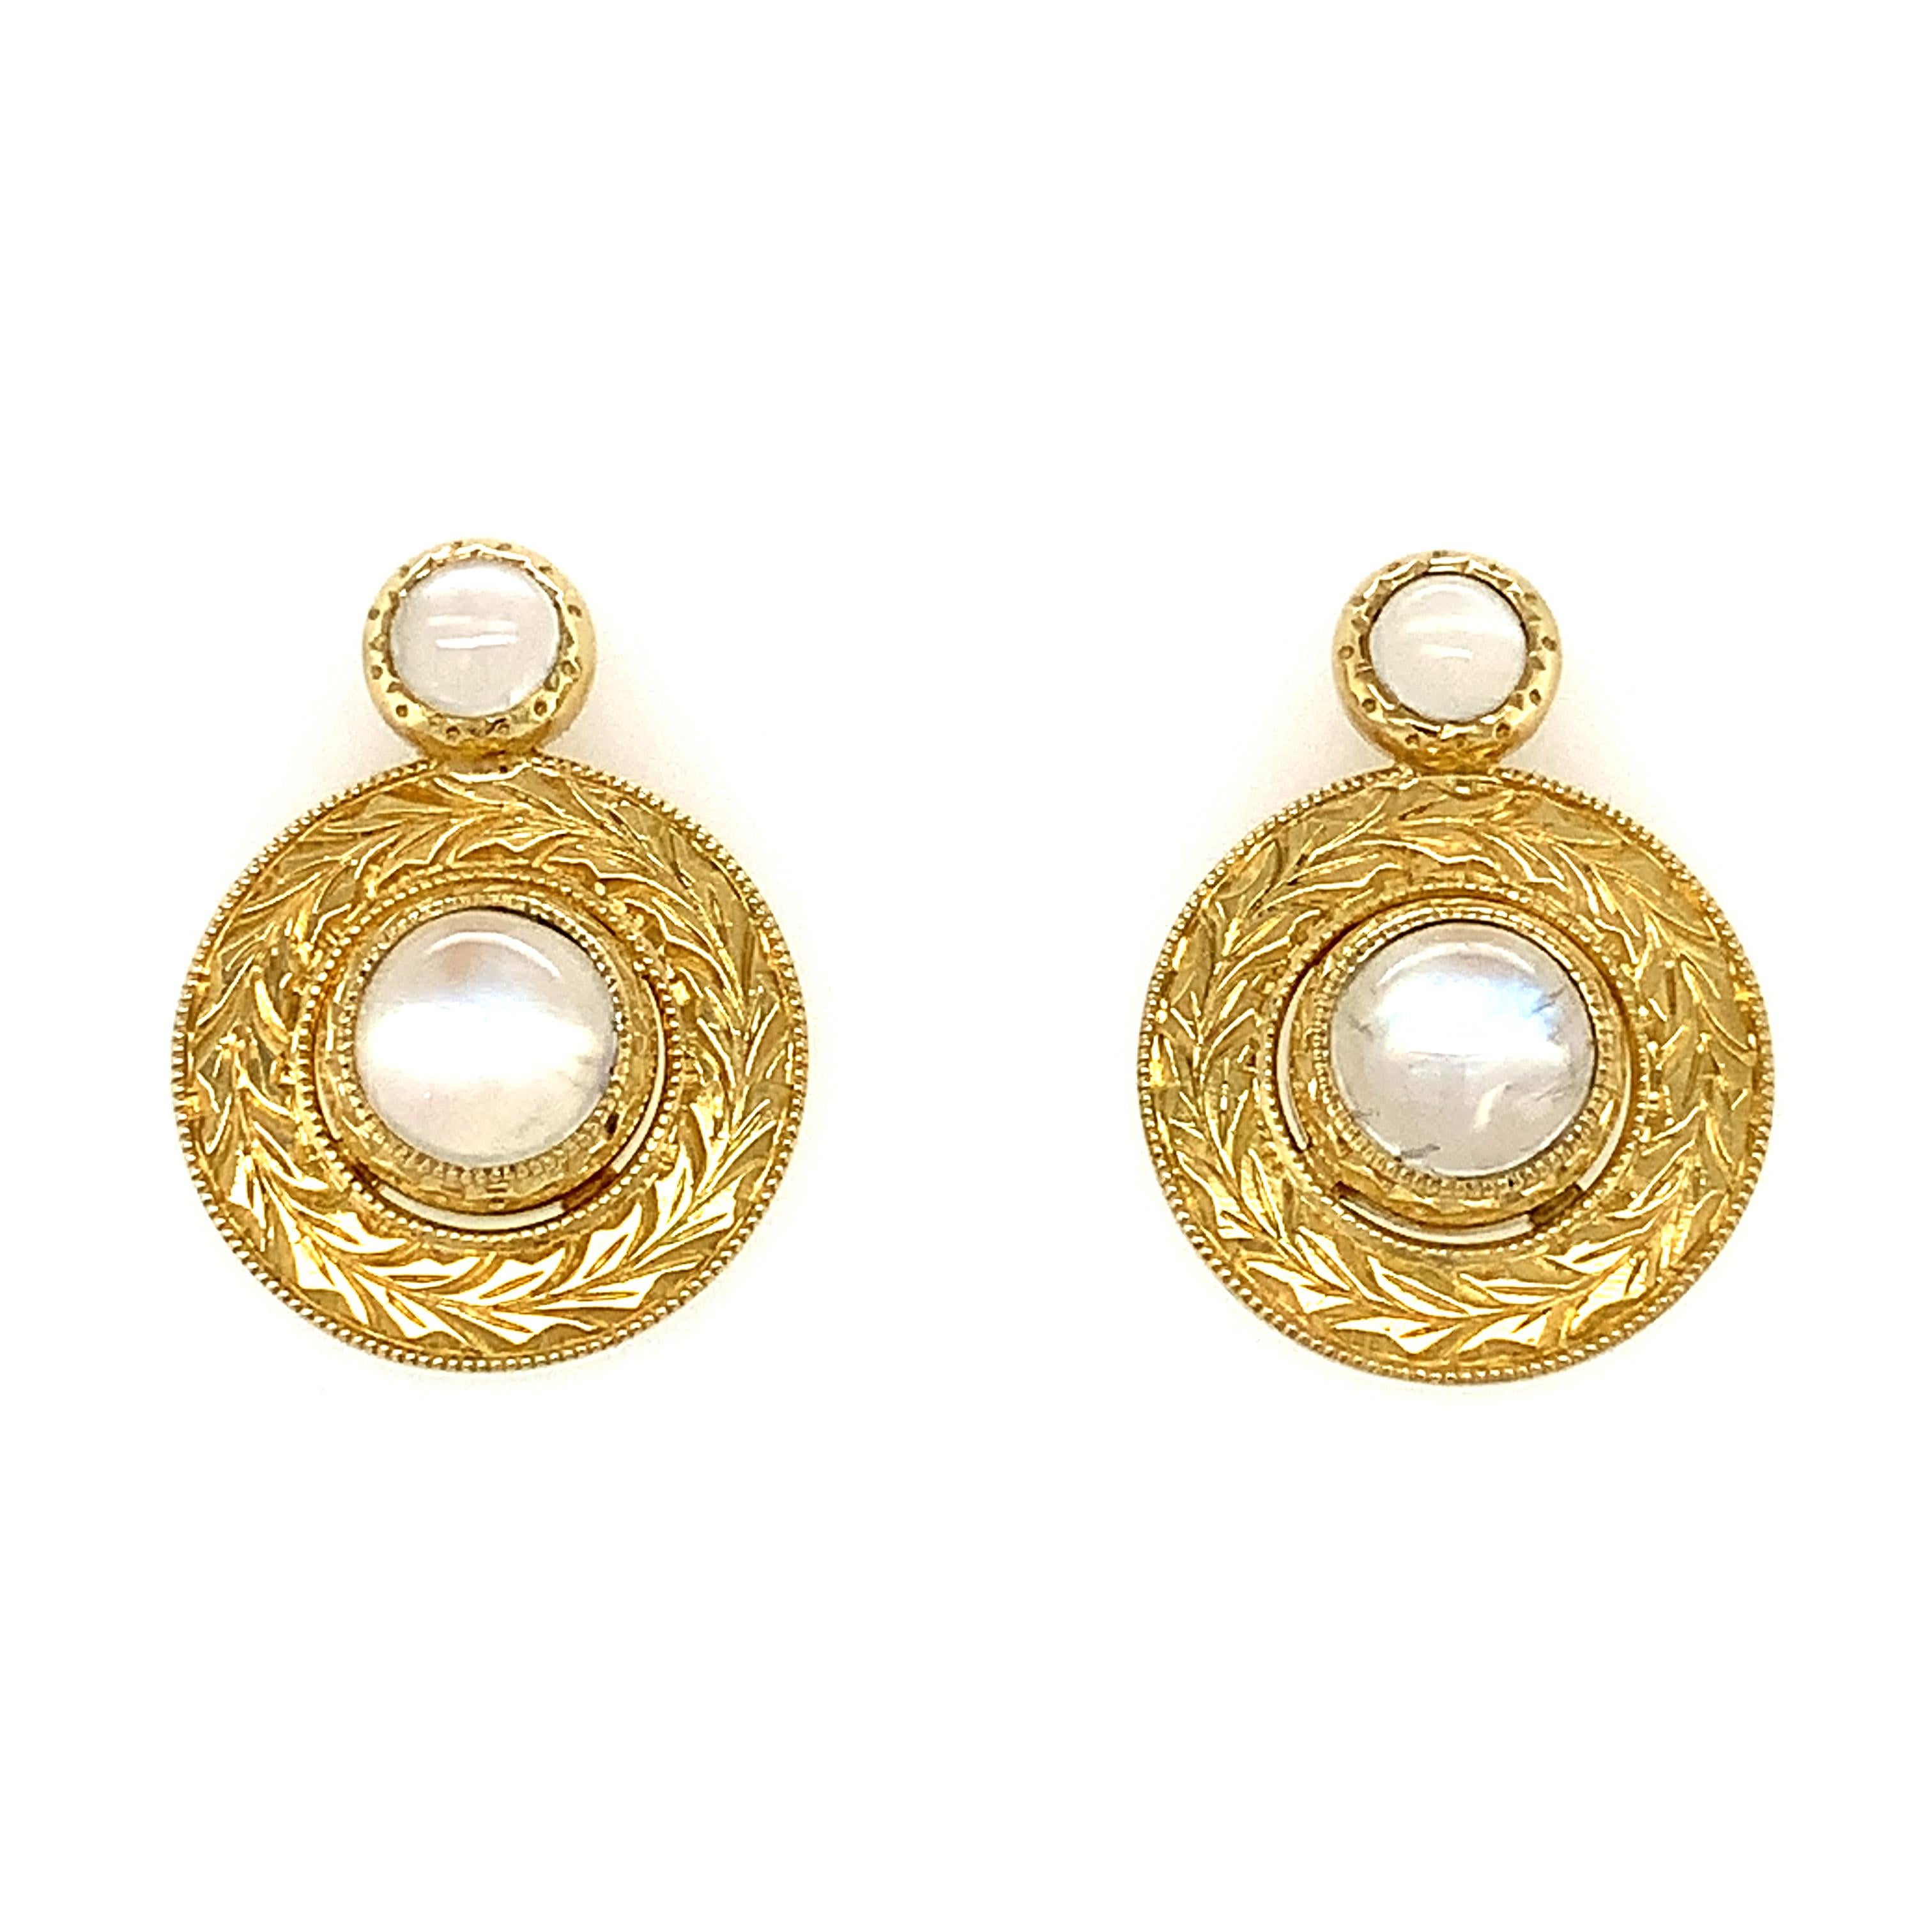 These captivating drop earrings are part of our Day to Night Signature Collection and feature gorgeous moonstones with beautiful adularescence. Adularescence, or 